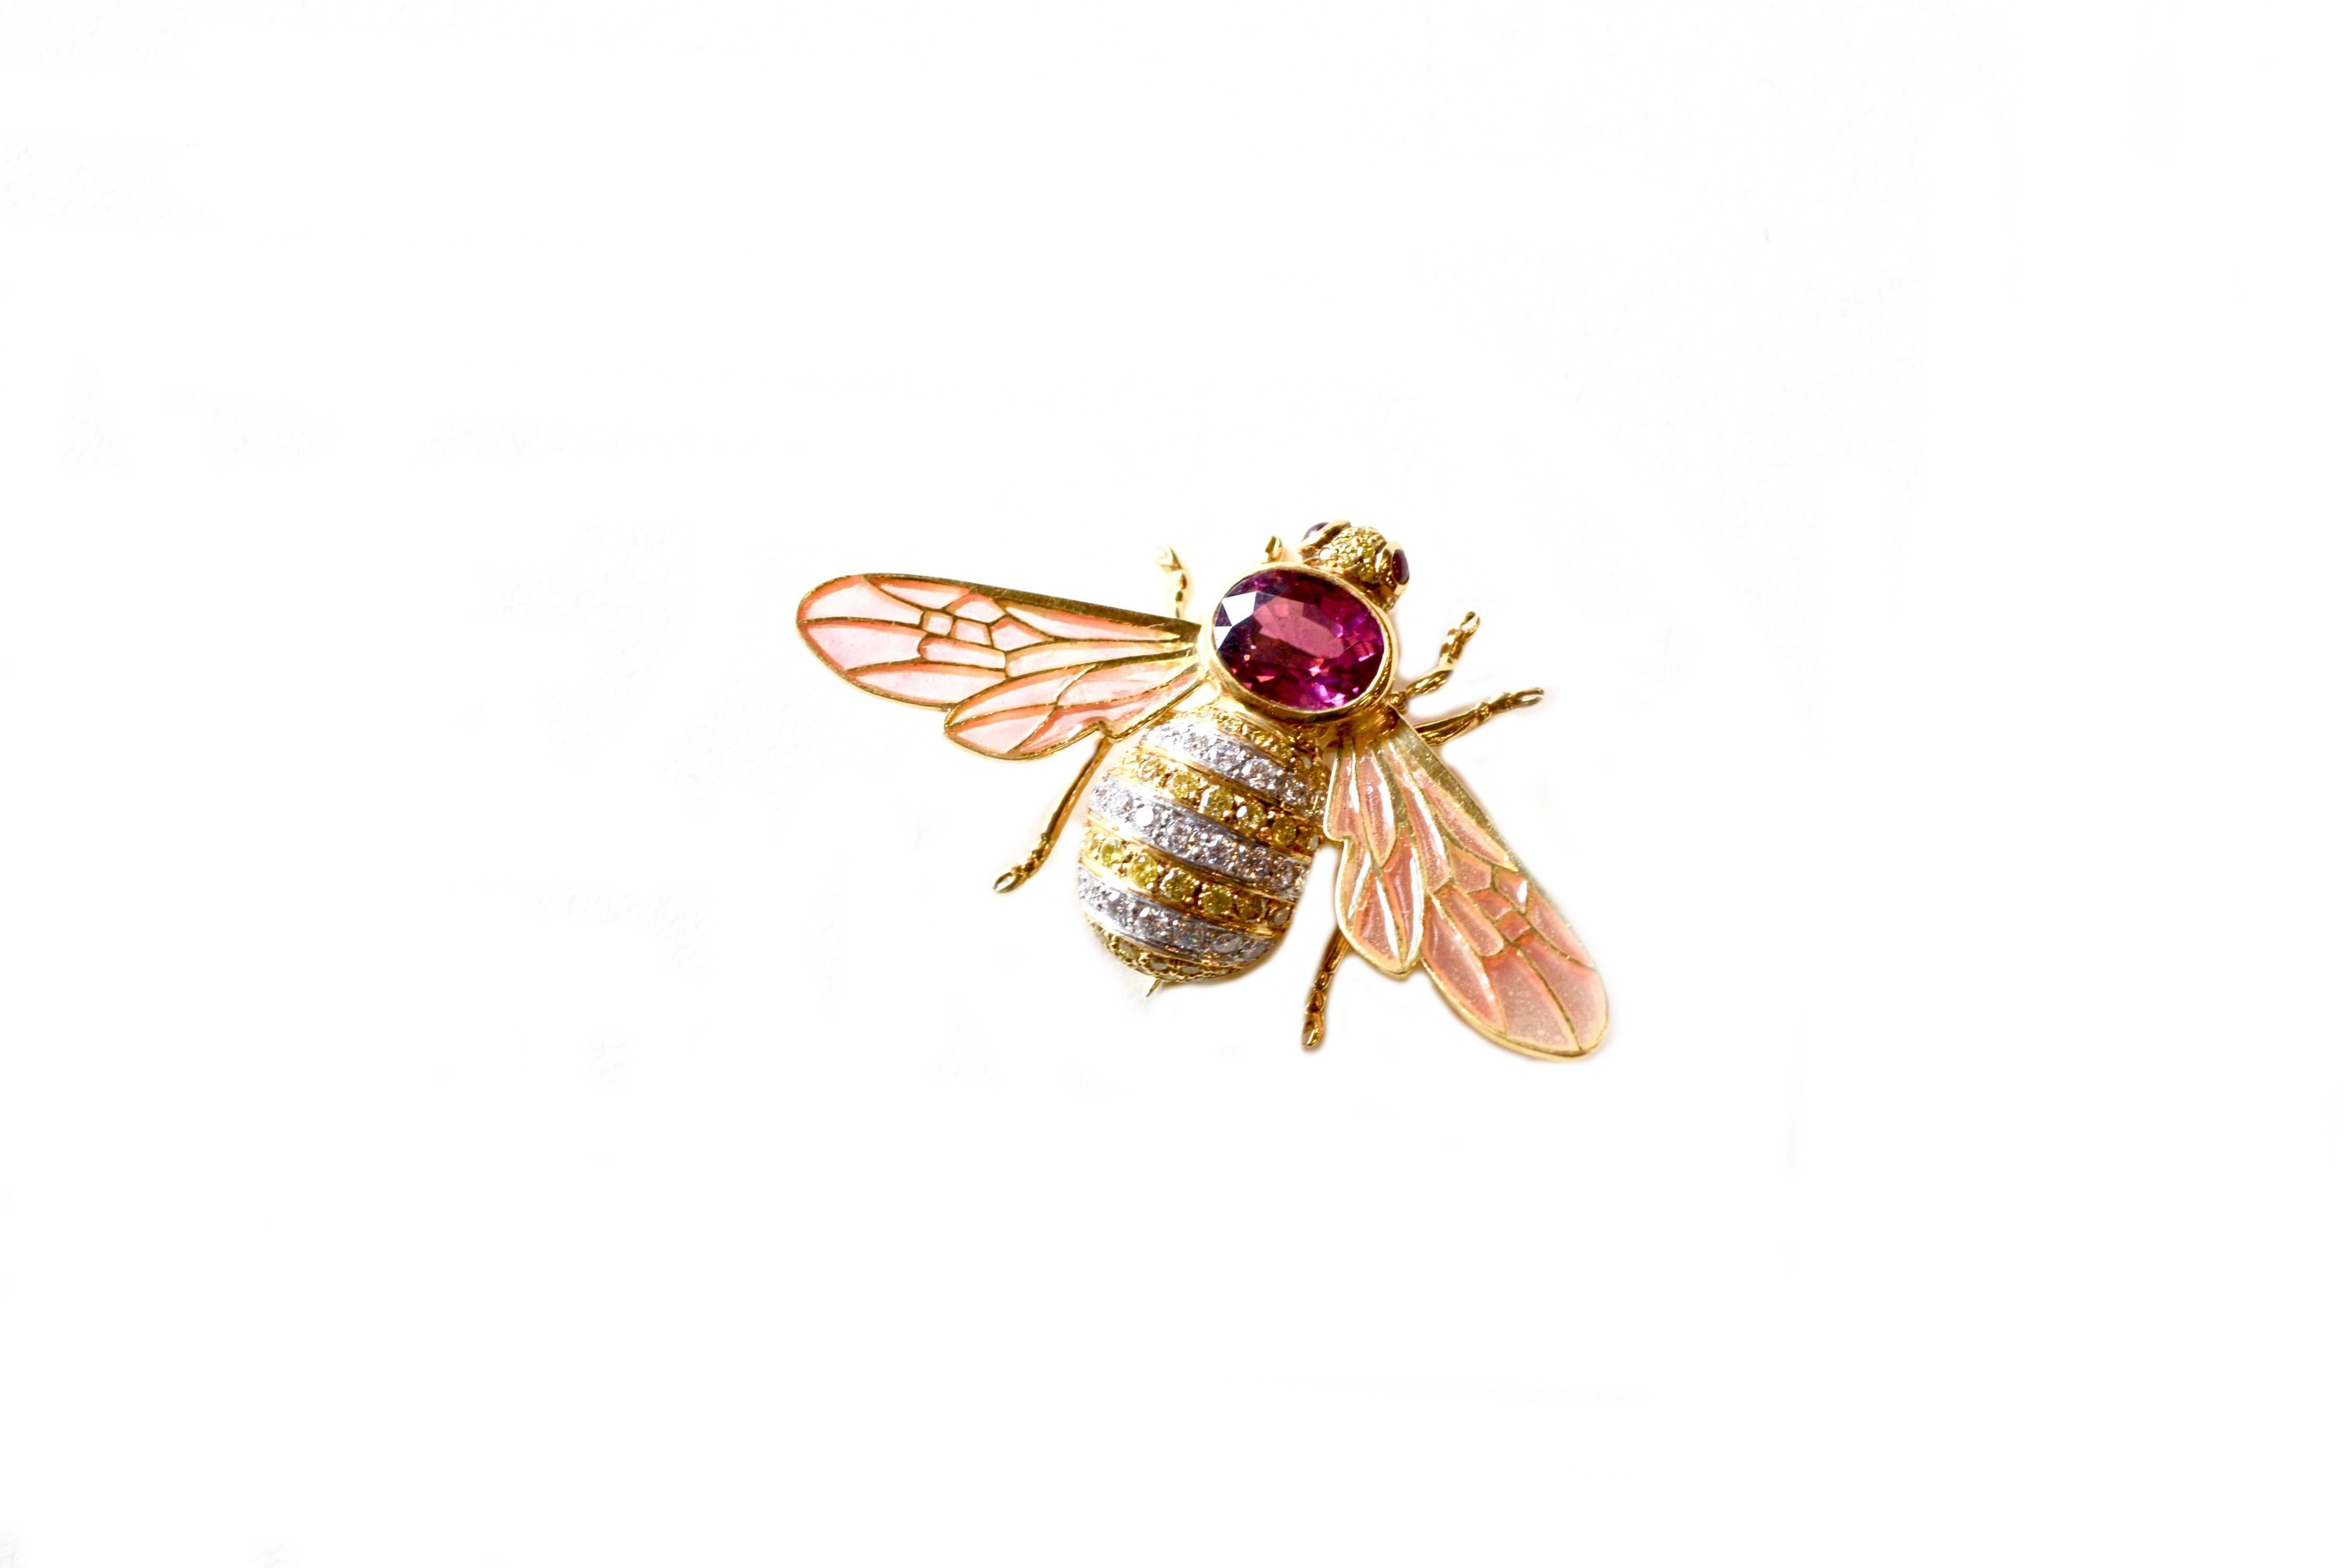 Adria de Haume 18 Karat Gold Bee Brooch / One of a Kind In Excellent Condition For Sale In Roxbury, CT